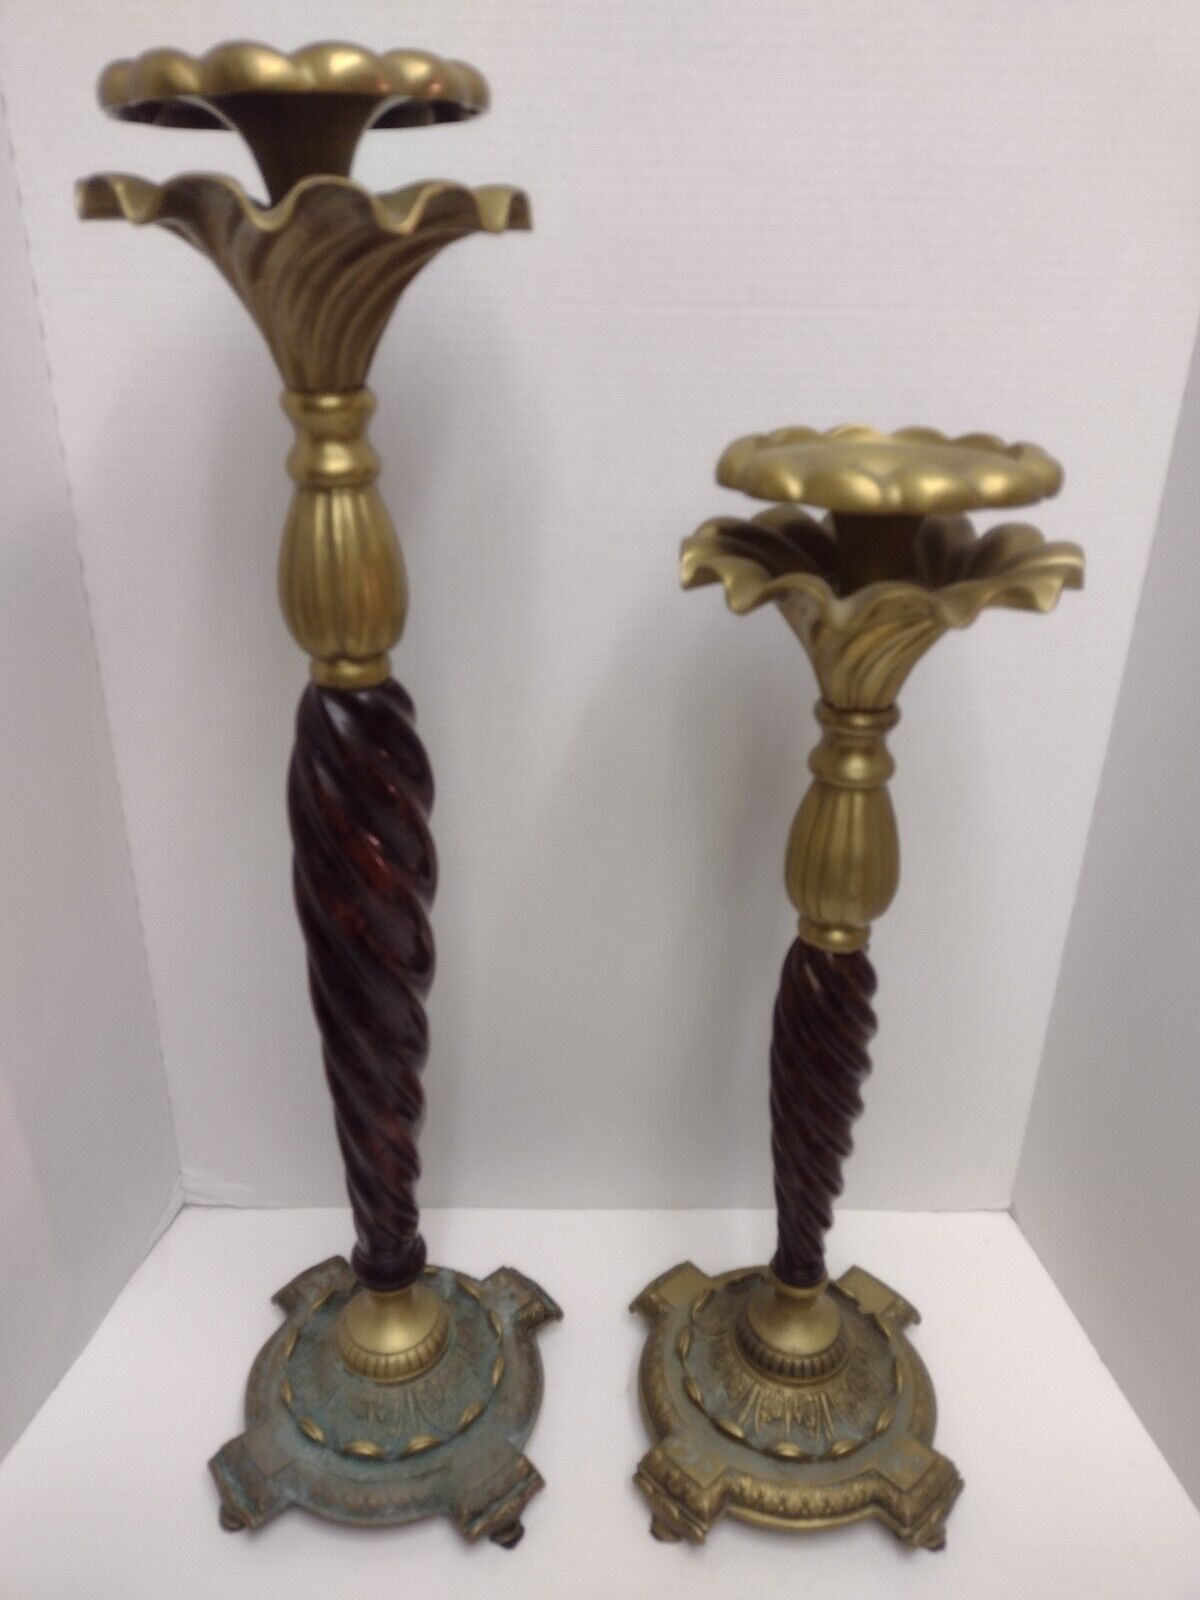 Huge Decorative Brass Candle Holders Polished Wooden Spiral  Ruffle Pair Mcm 